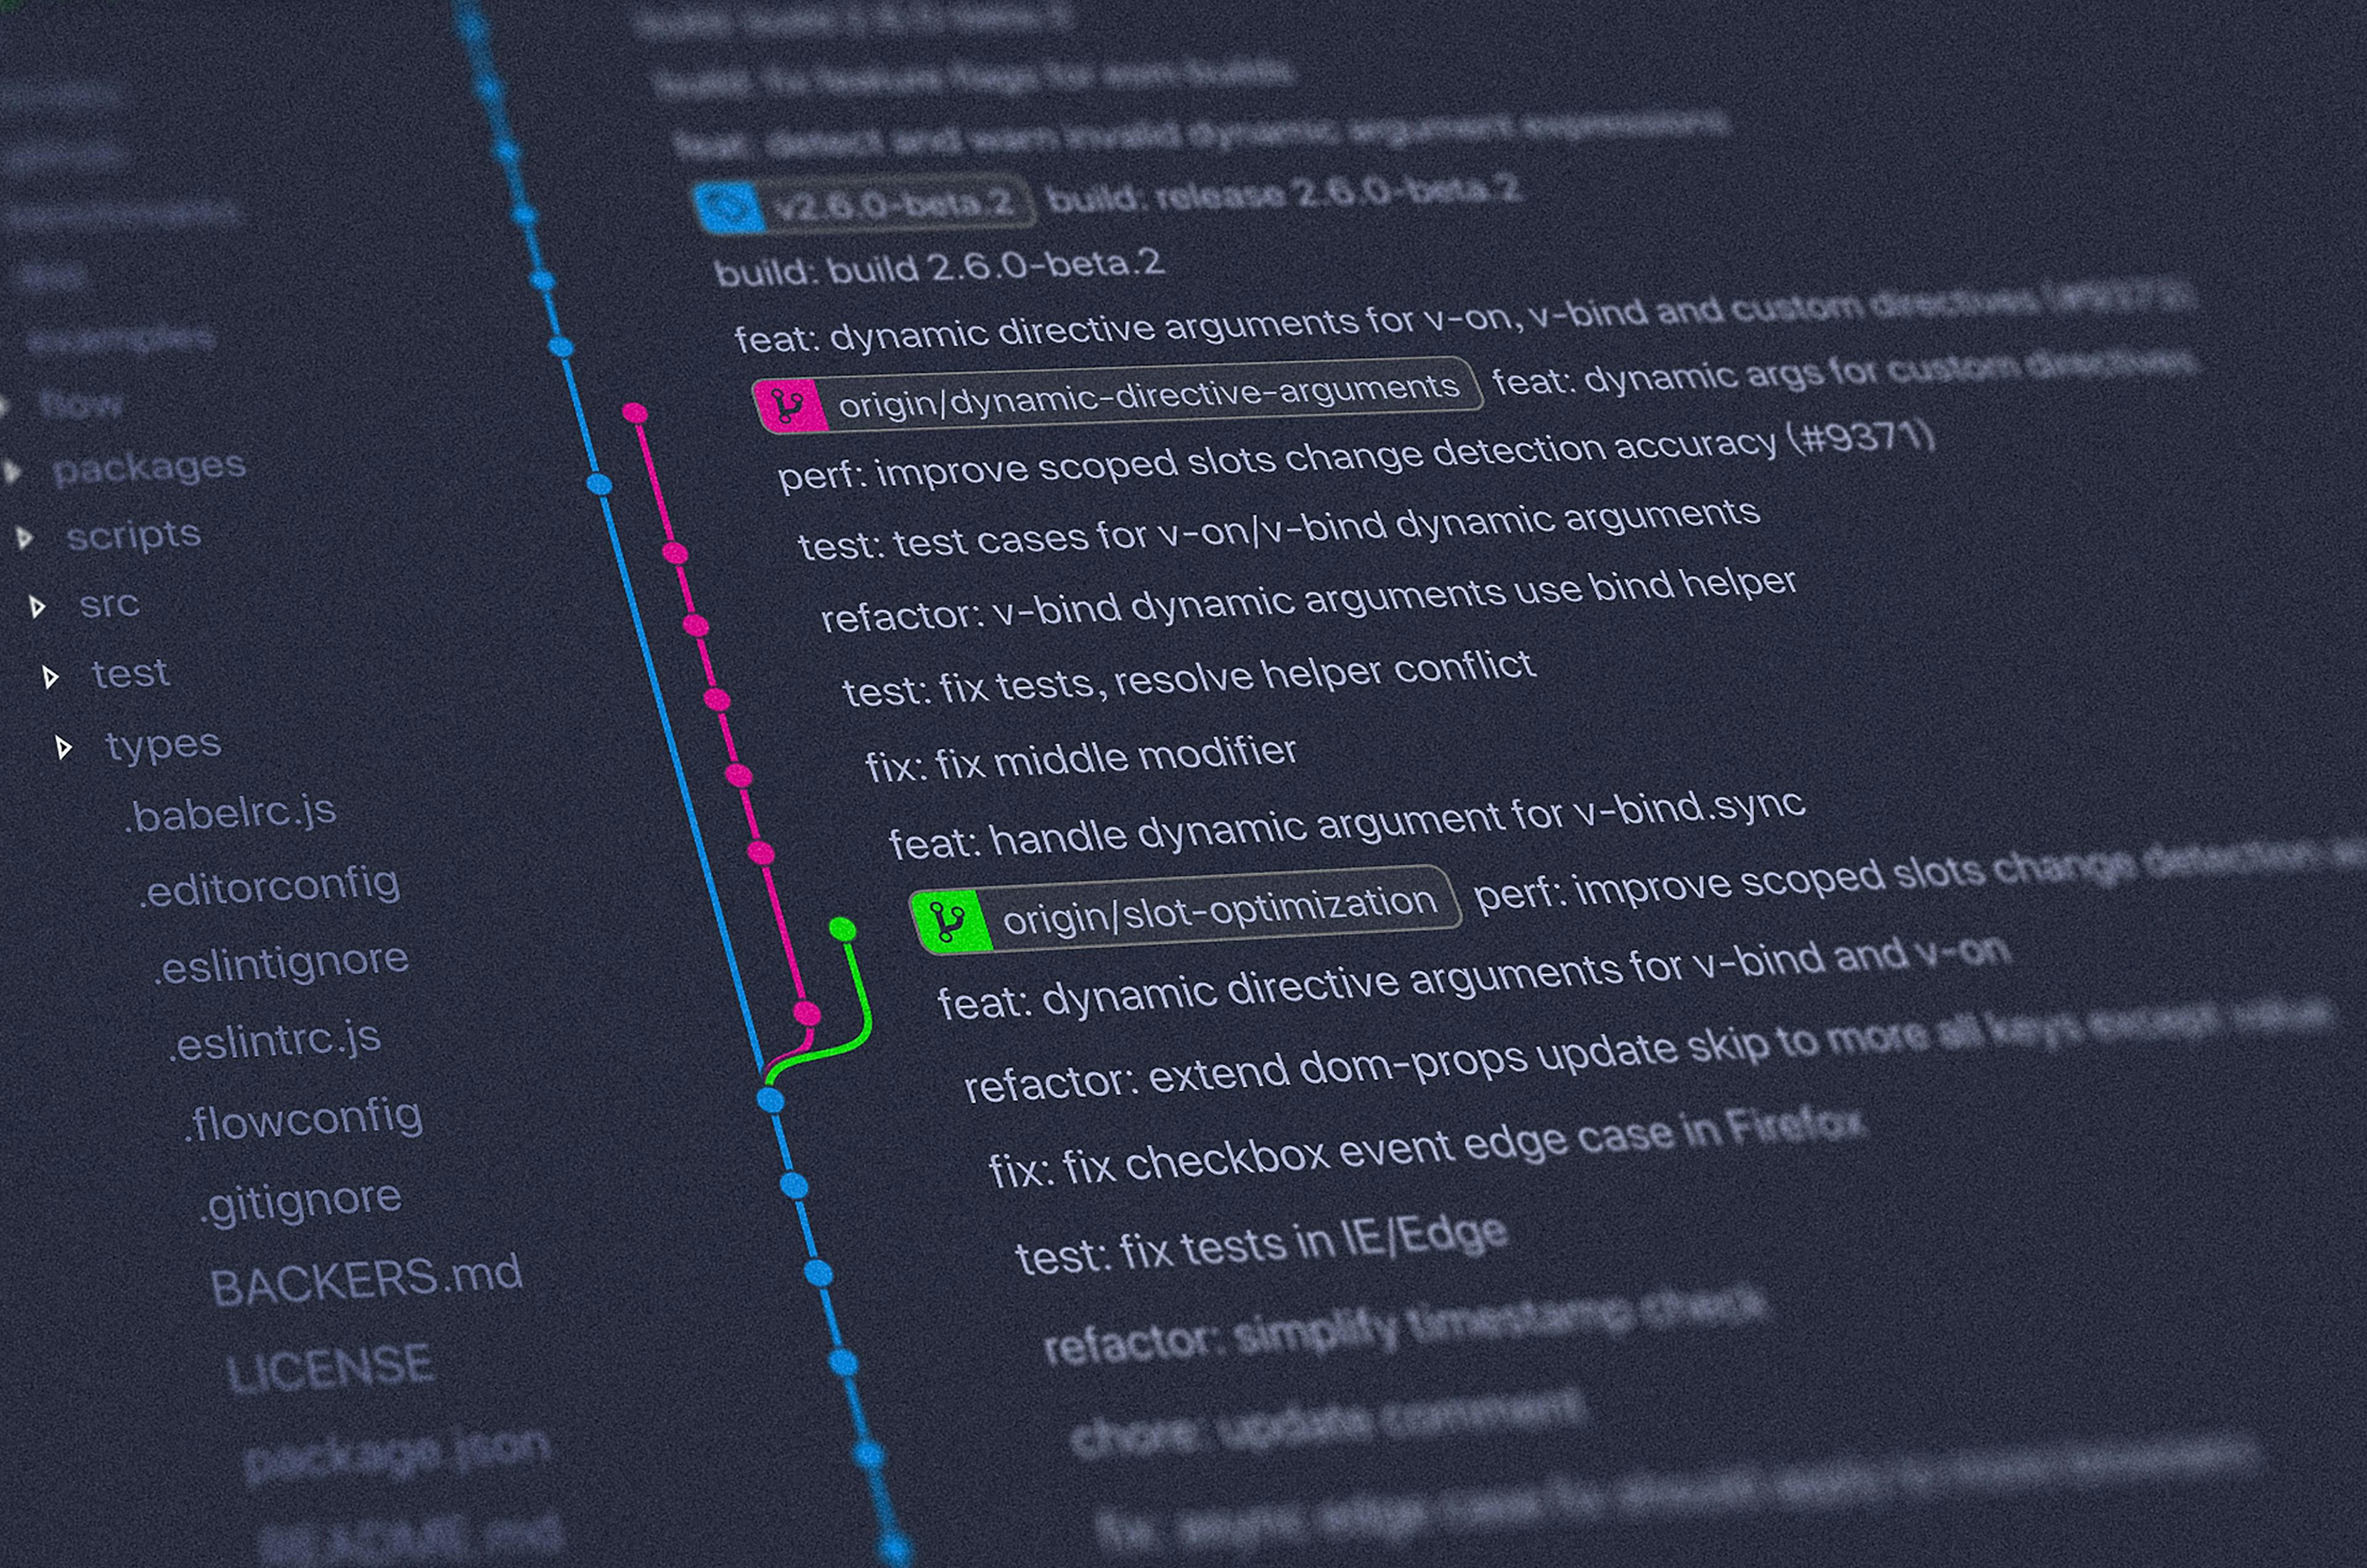 featured image - 8 underrated Git commands every programmer should know (not the usual pull, push, add, commit)